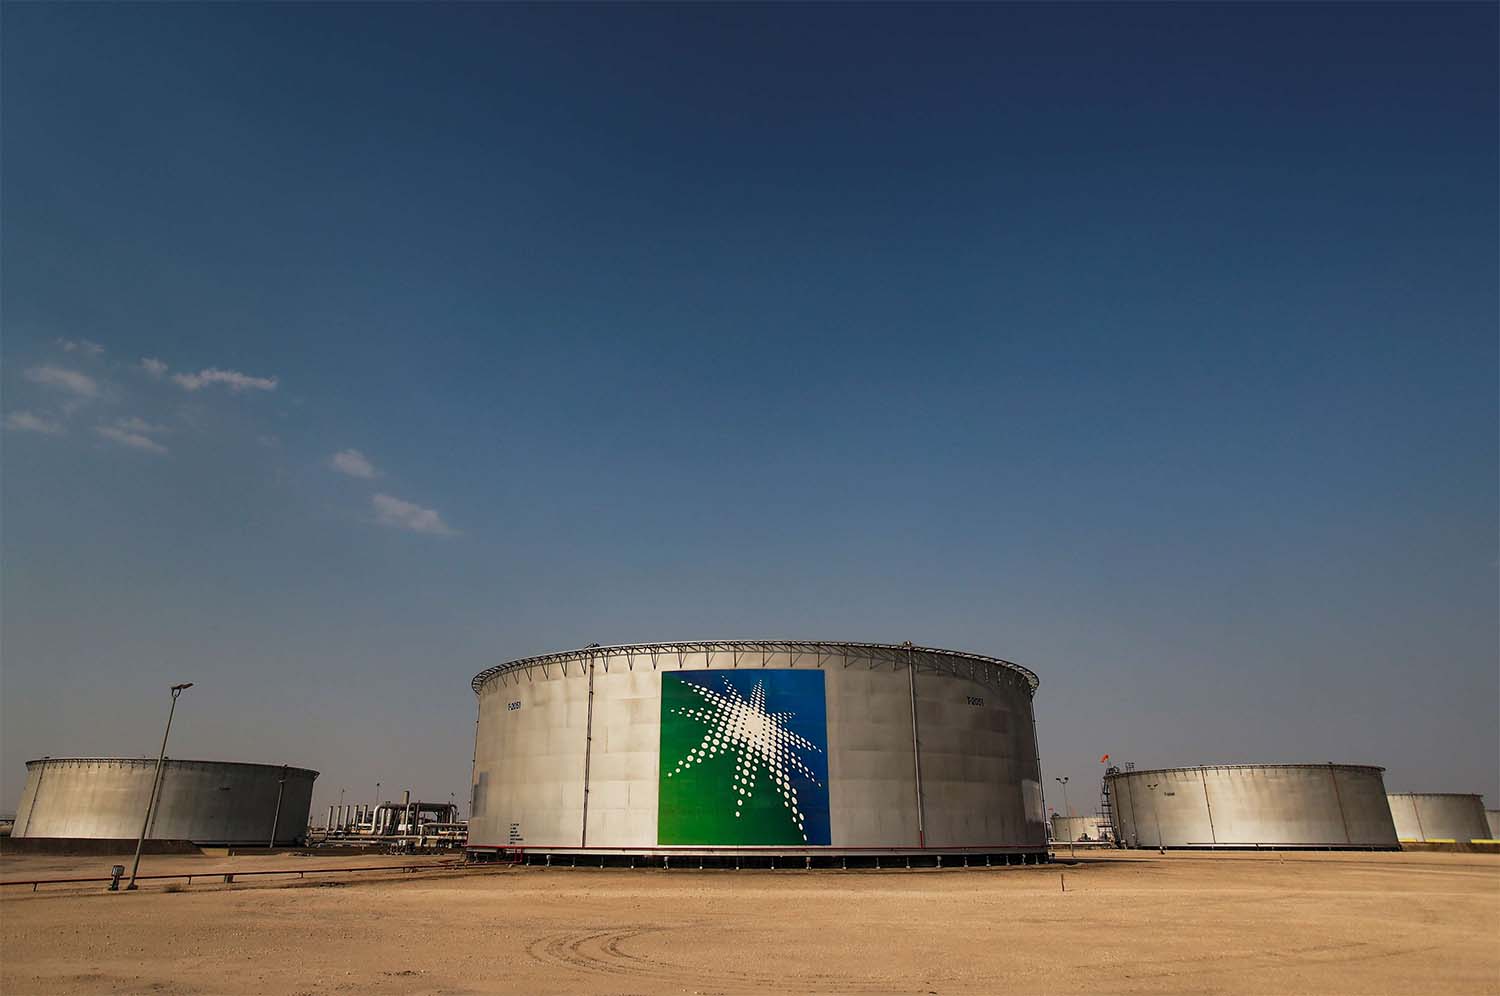 Aramco confirmed it would deliver on a promised dividend payout of $18.75 billion for its shareholders